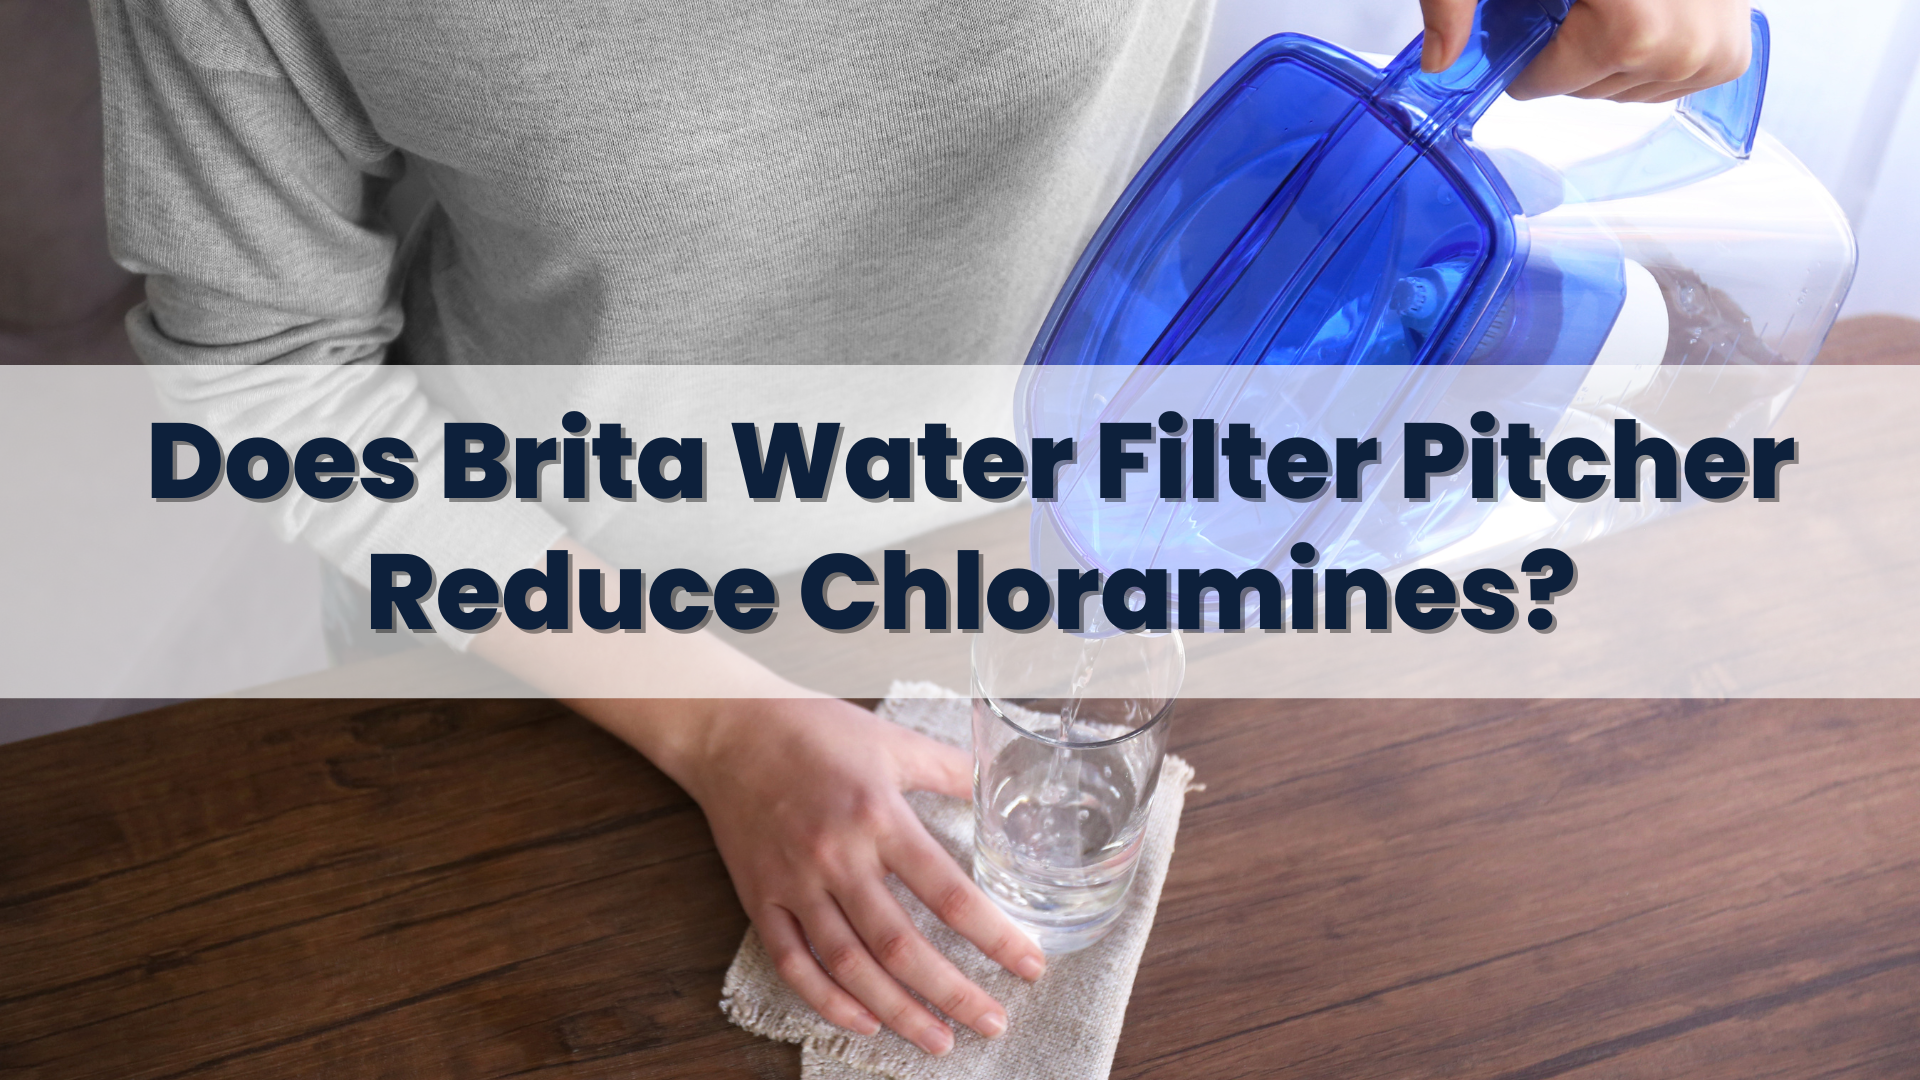 Does brita water filter pitcher reduce chloramines